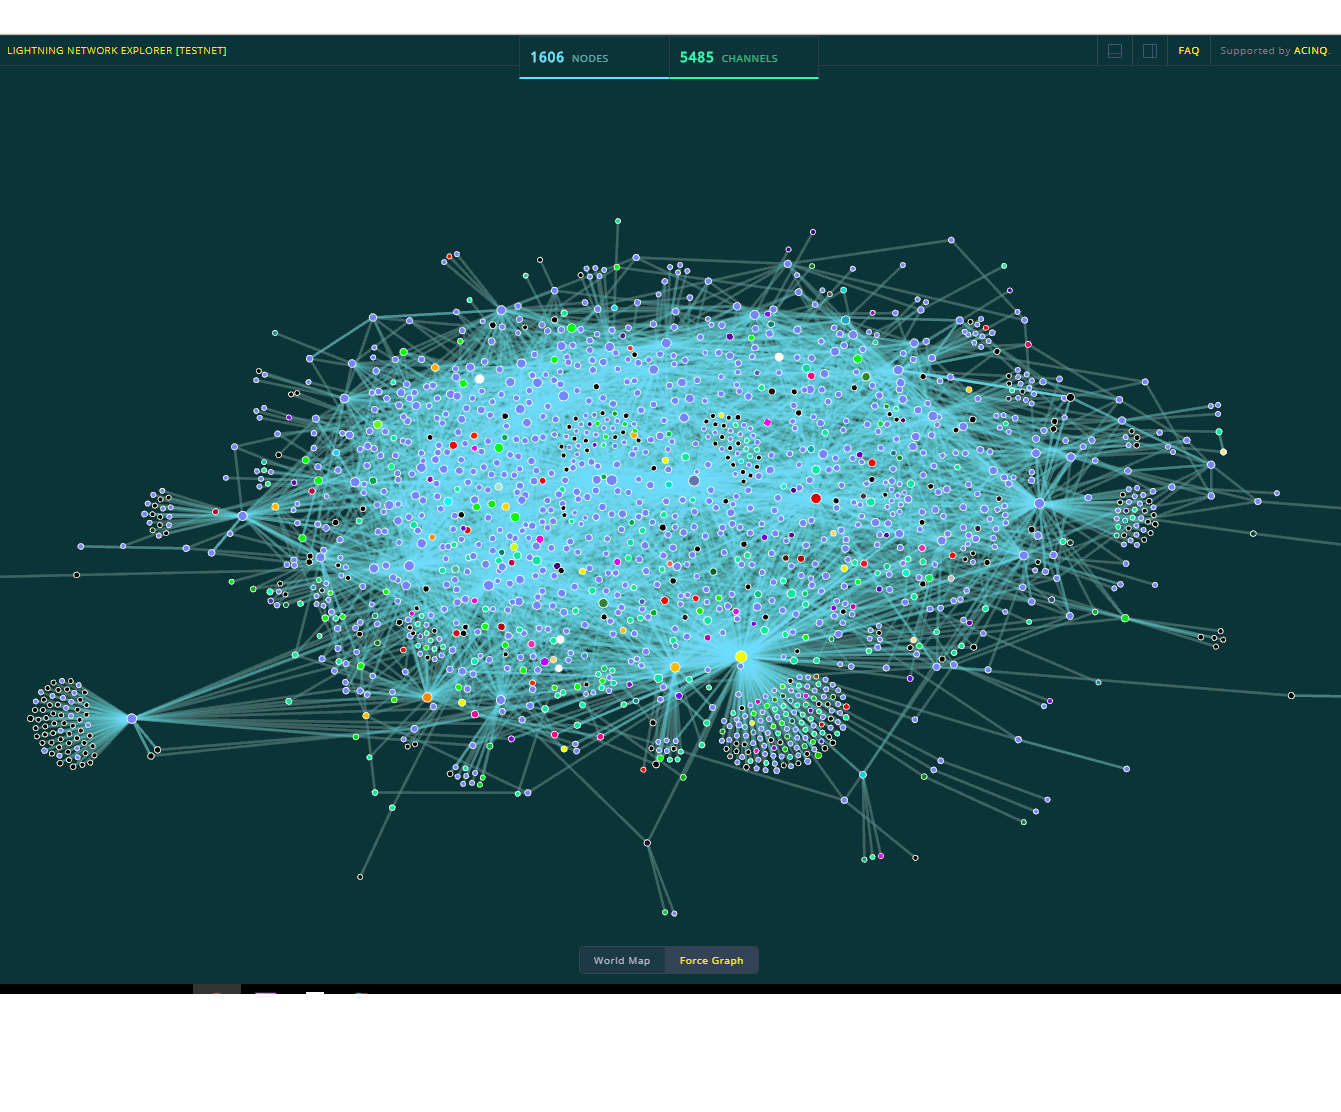 lightning-network-31th-1-2018.png